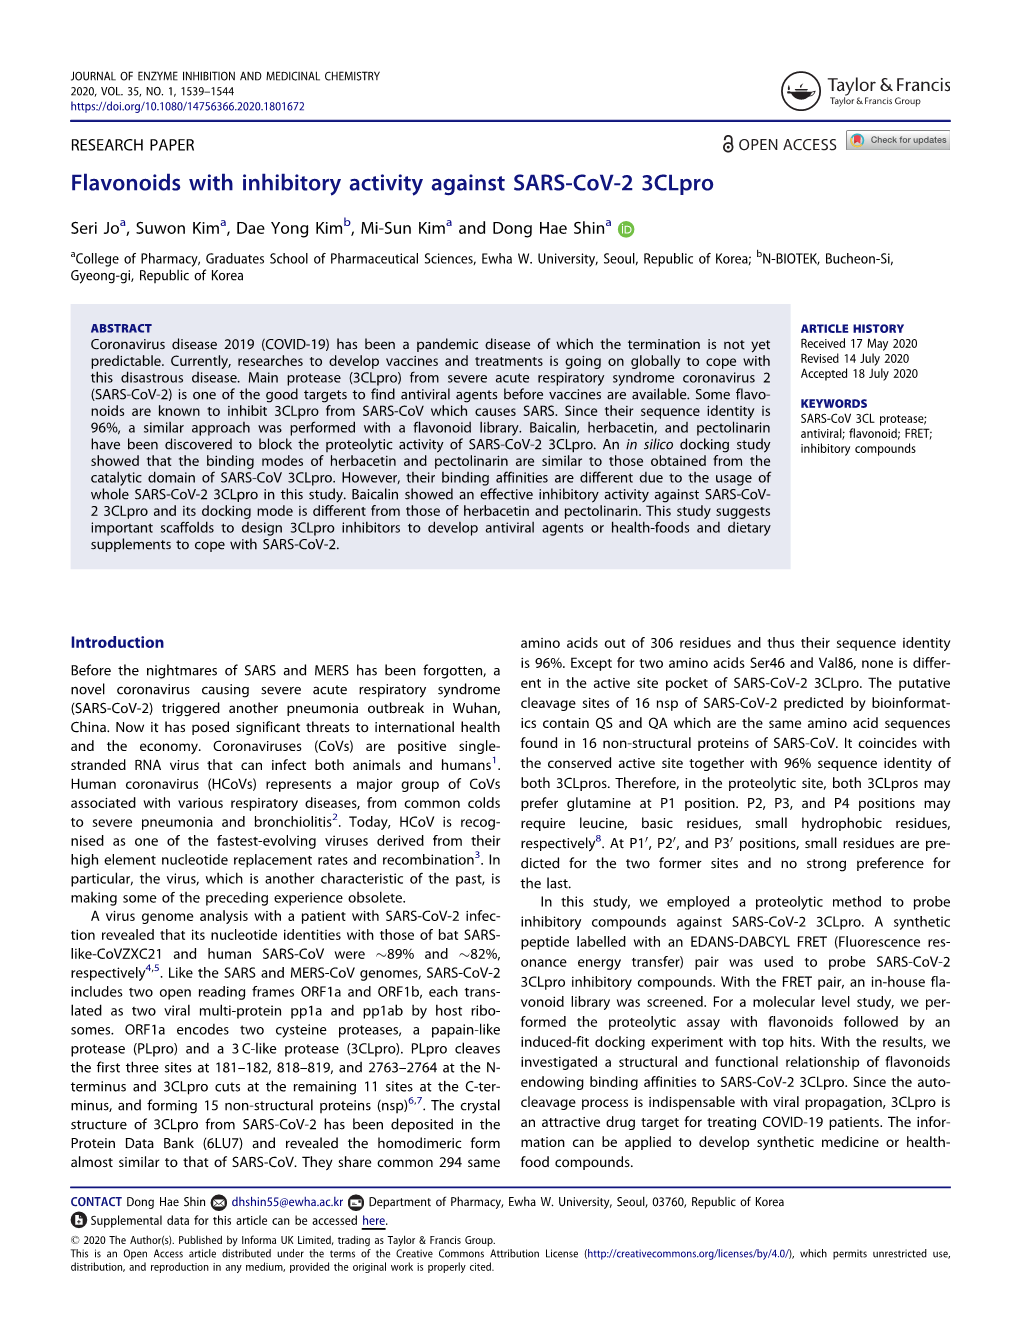 Flavonoids with Inhibitory Activity Against SARS-Cov-2 3Clpro